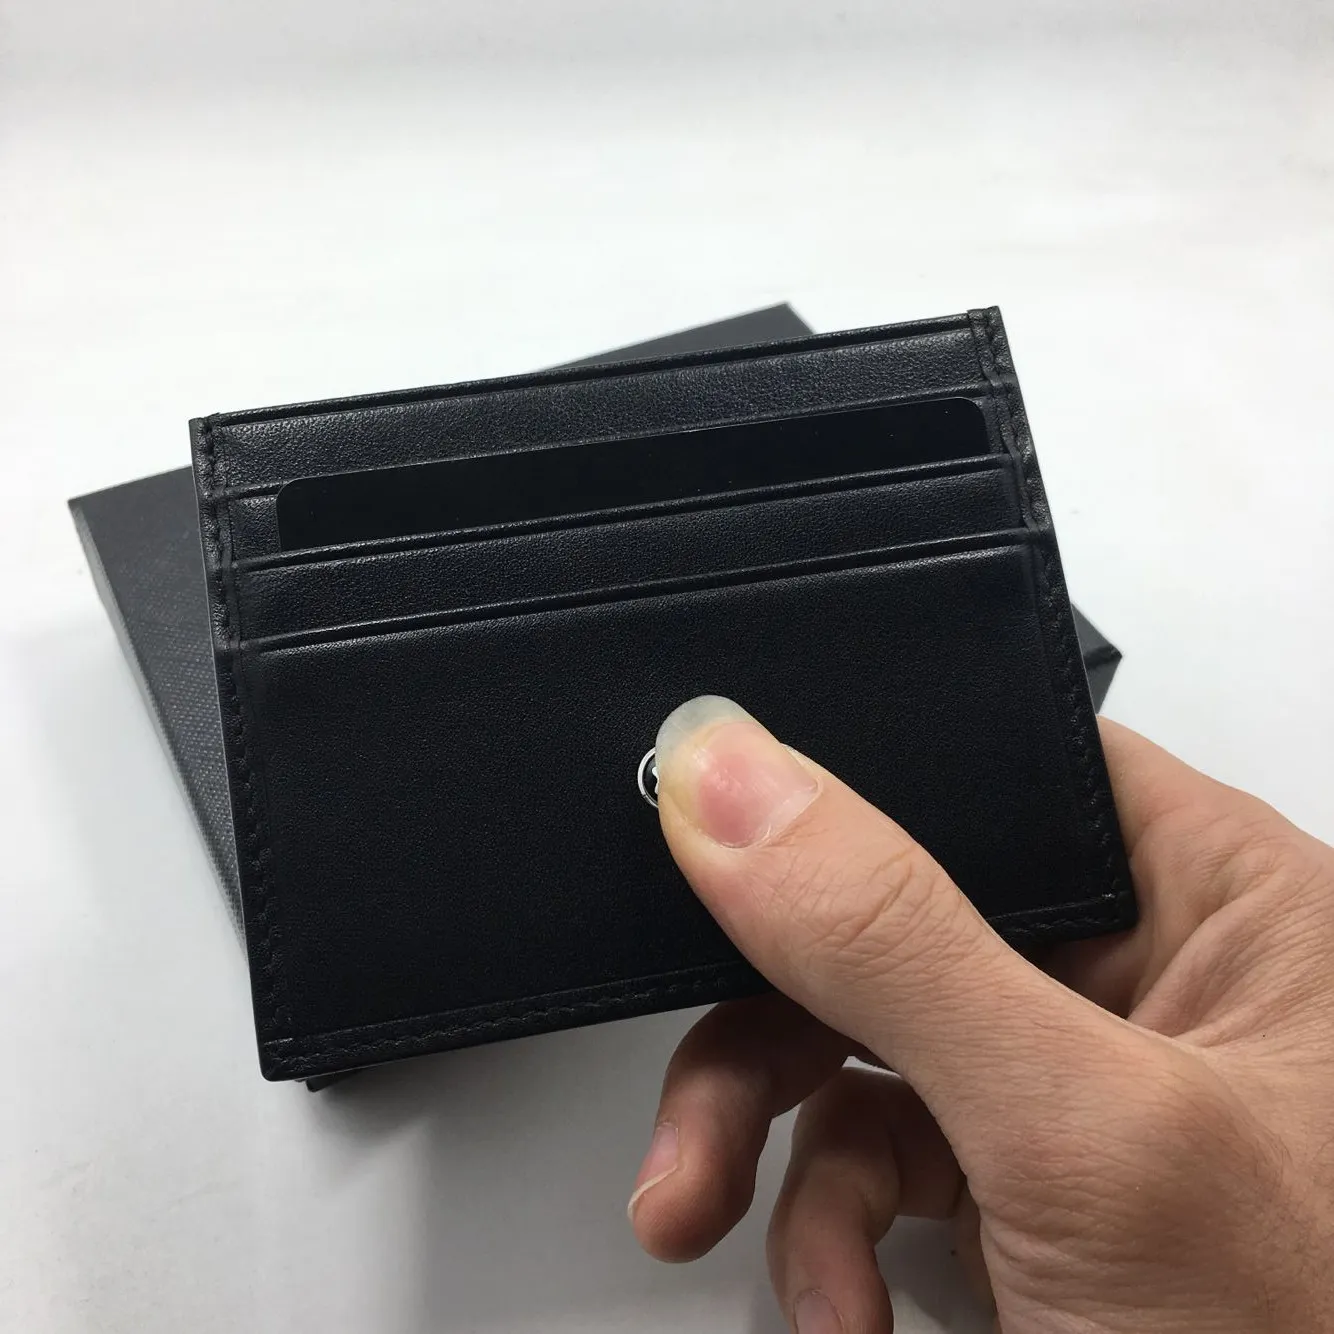 Black Genuine Leather Credit Card Holder Business Men High Quality Slim Bank Card Case 2017 New Arrivals Fashion ID Card Purse Fre269m